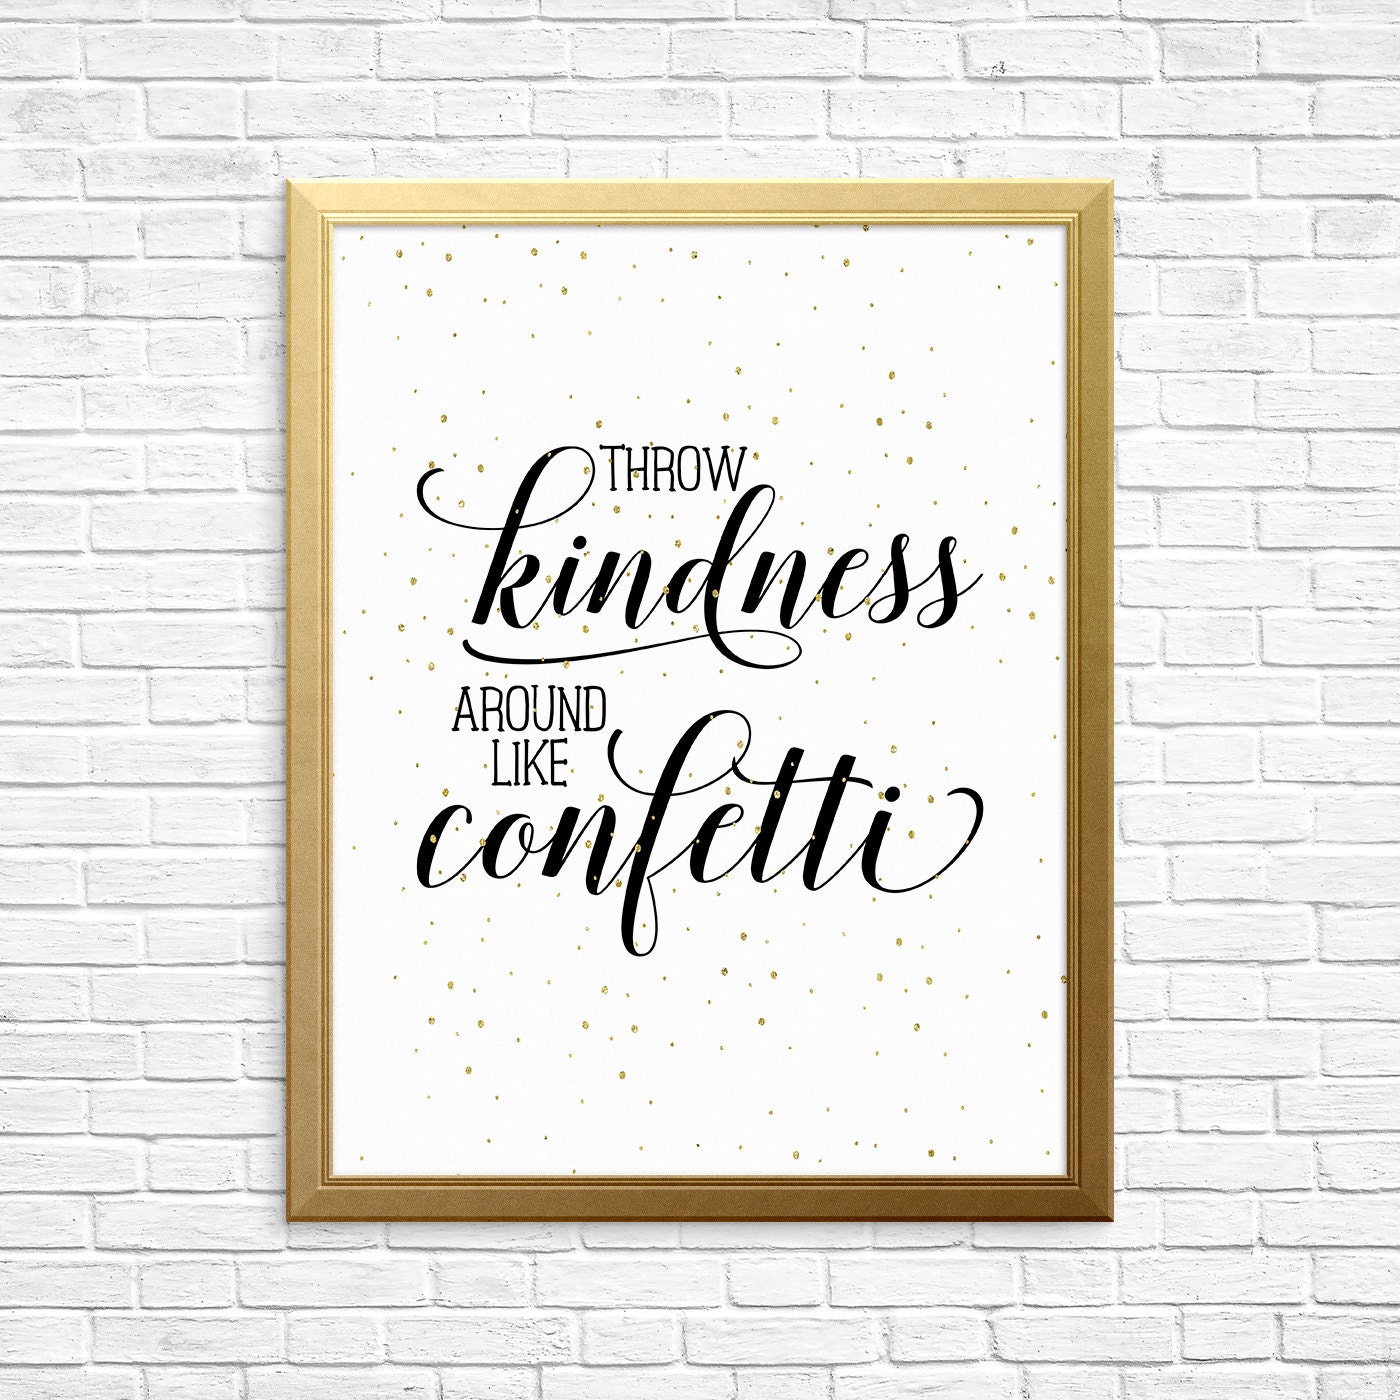 Art, Confetti, Room Print Art Motivational Gold Like Art, Printable - Print, Wall Kind, Kindness Around Throw Etsy Decor, Be Typography Quote,